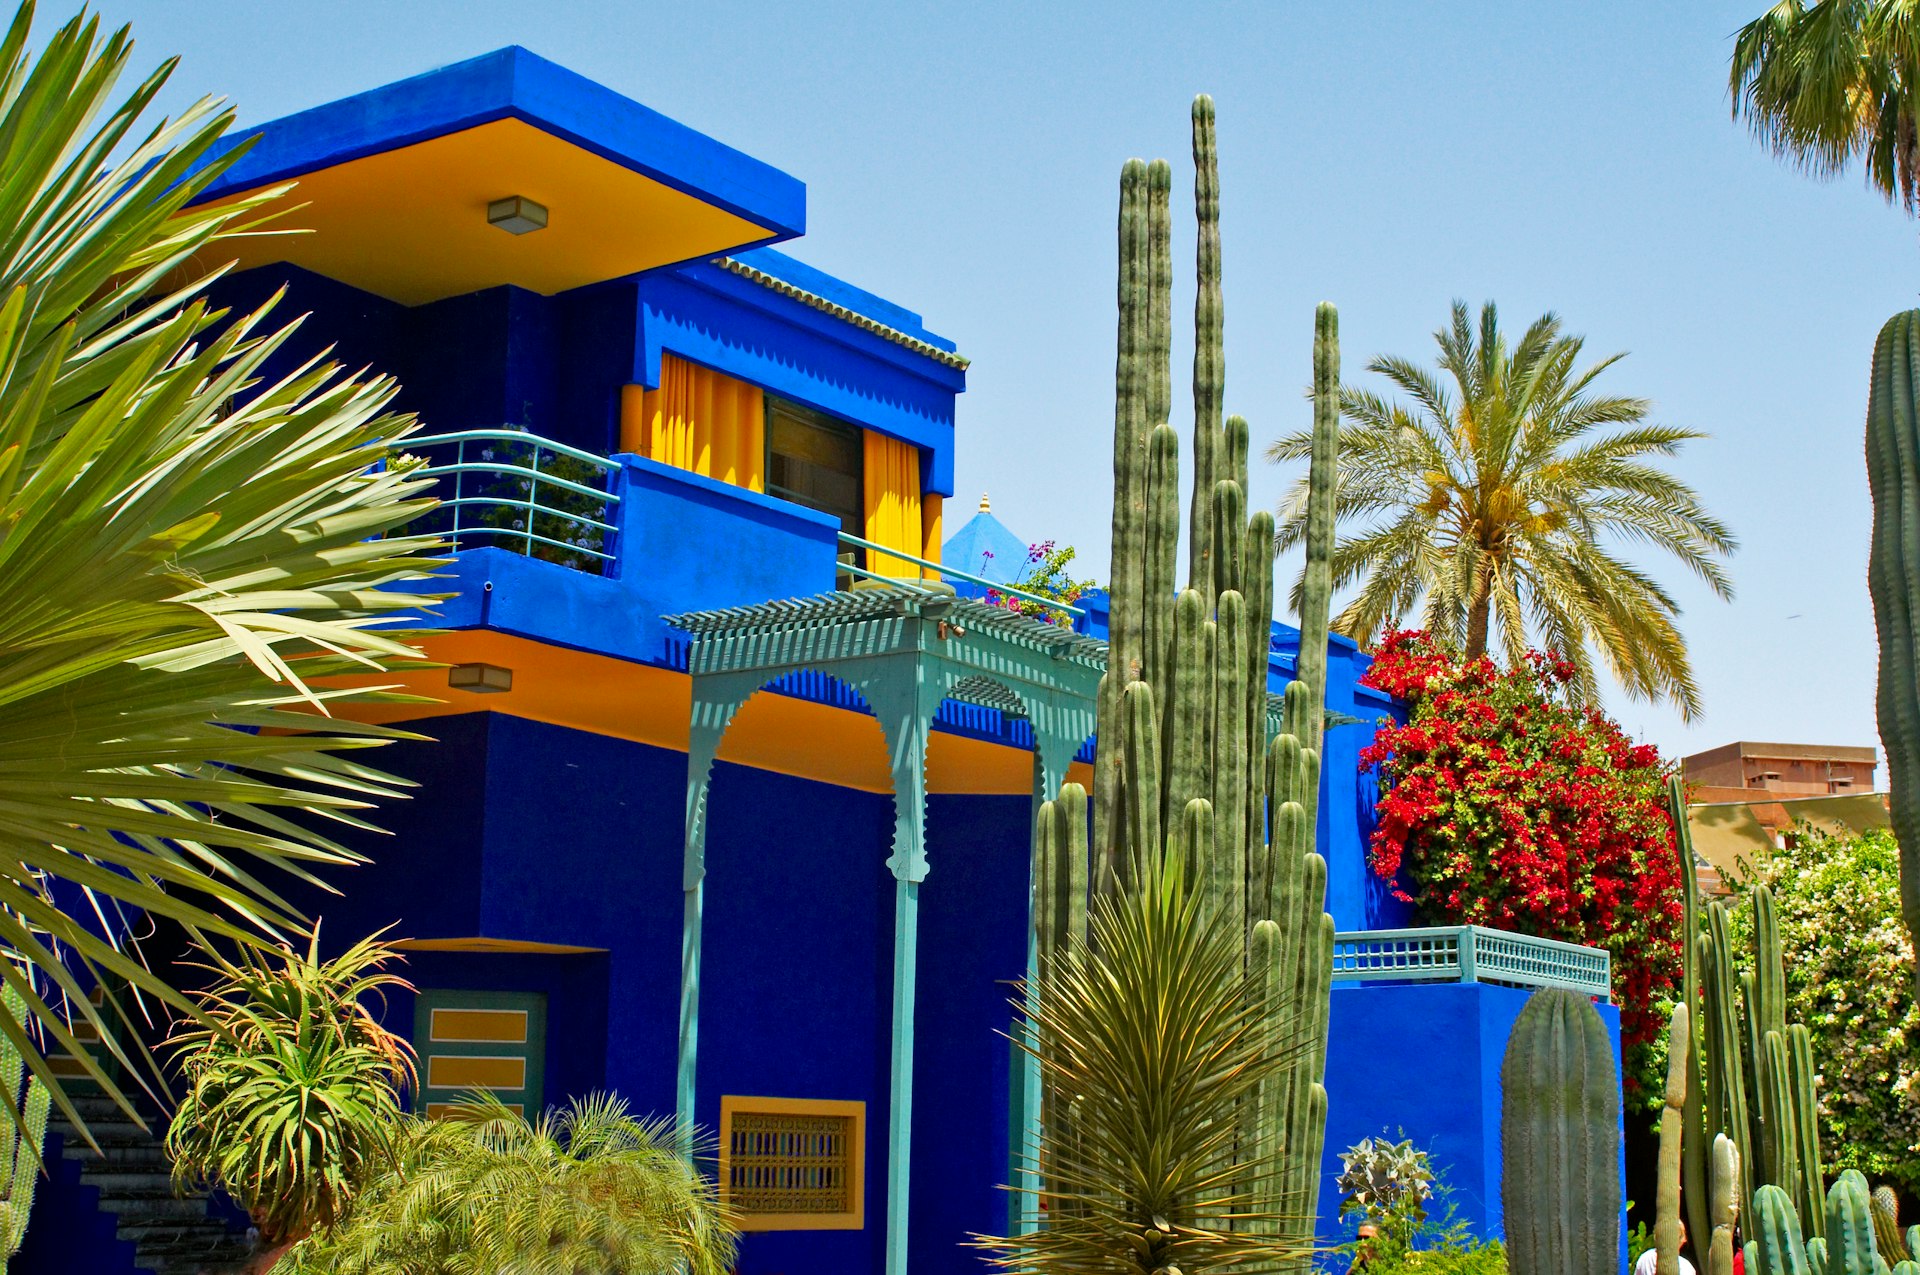 Blue building with yellow detail in a lush garden